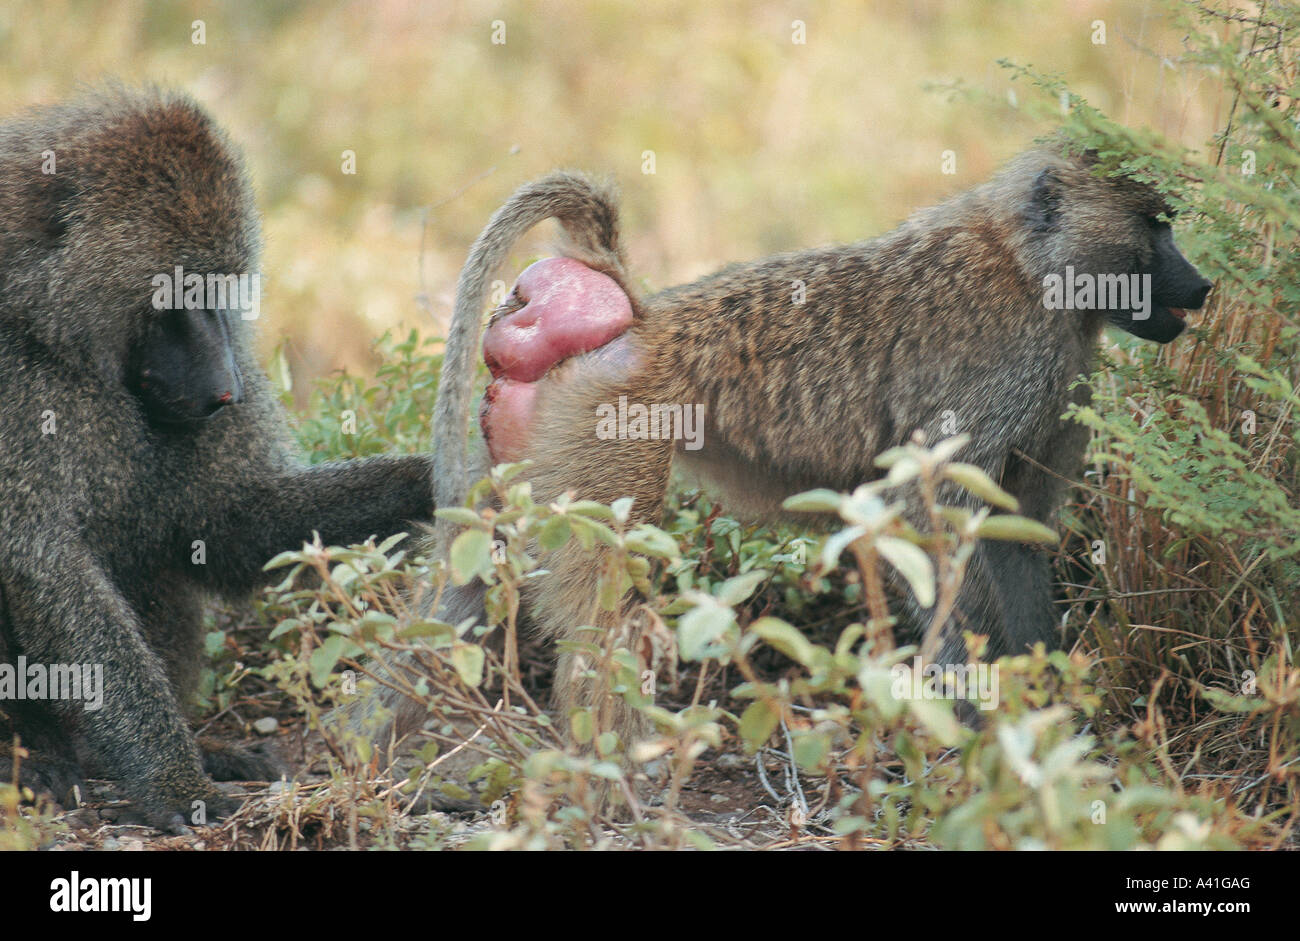 Male Olive Baboon grooms female who shows swollen callosities Lake Manyara National Park Tanzania East Africa Stock Photo